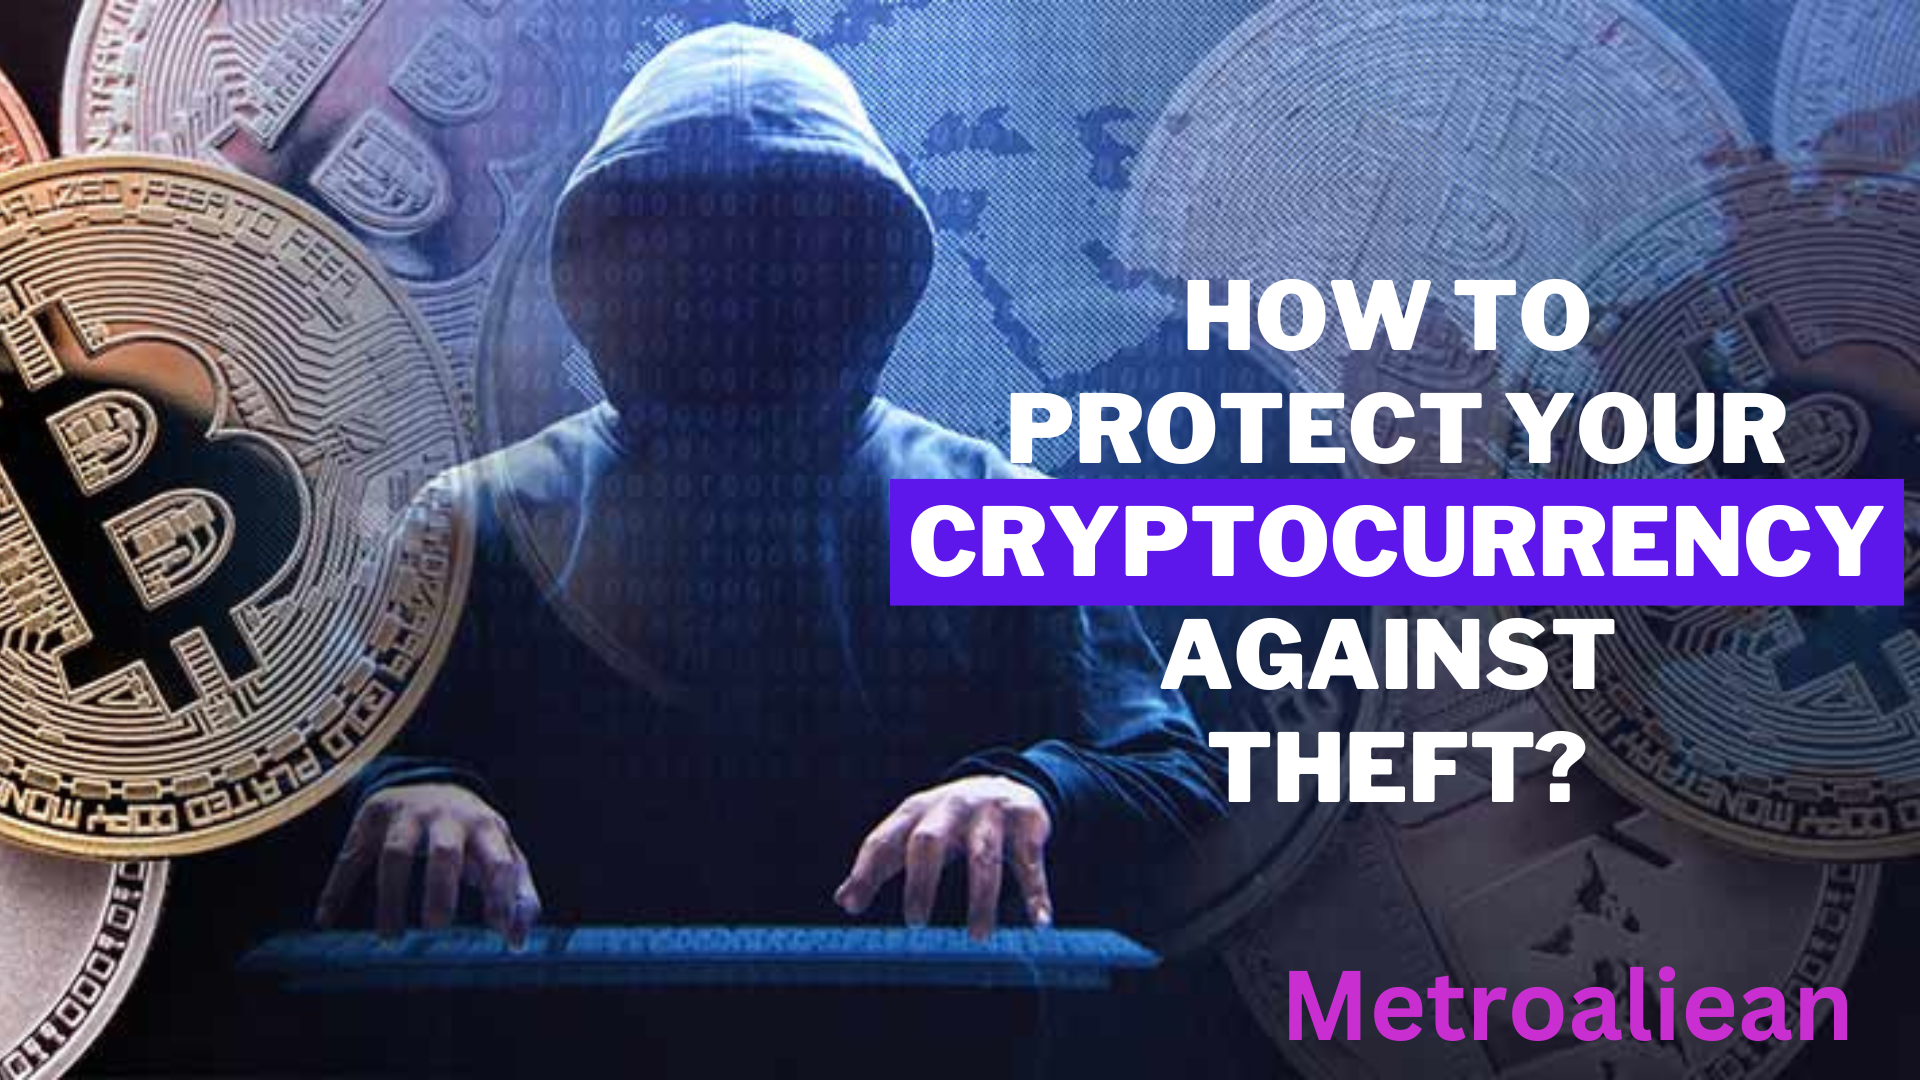 How to Protect Your Cryptocurrency Against Theft? bitcoin theft, cryptocurrency theft